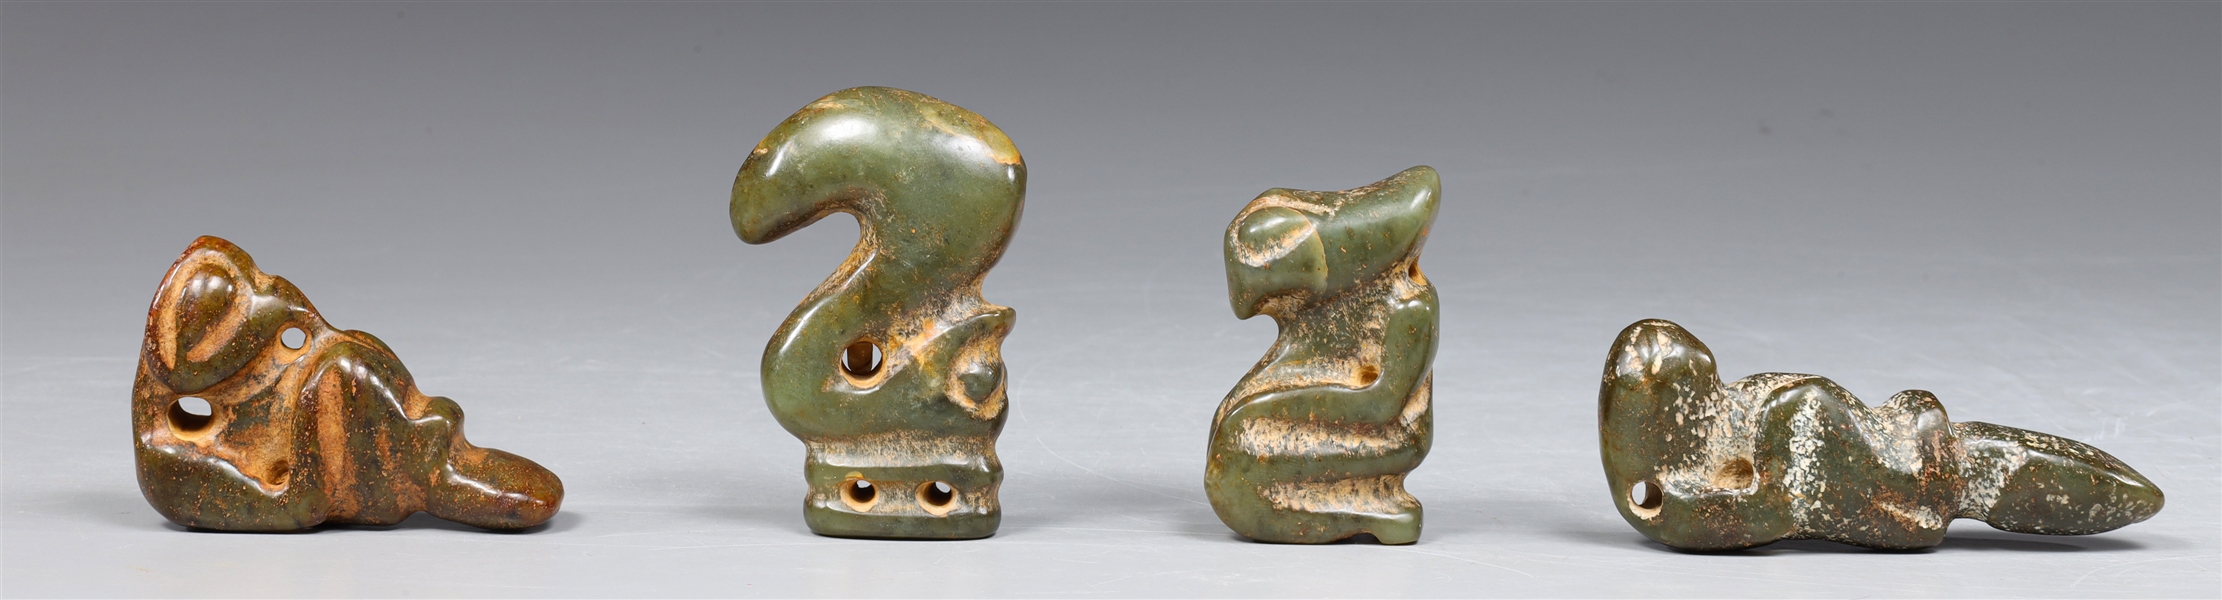 Group of four archaic Chinese style 3039bc